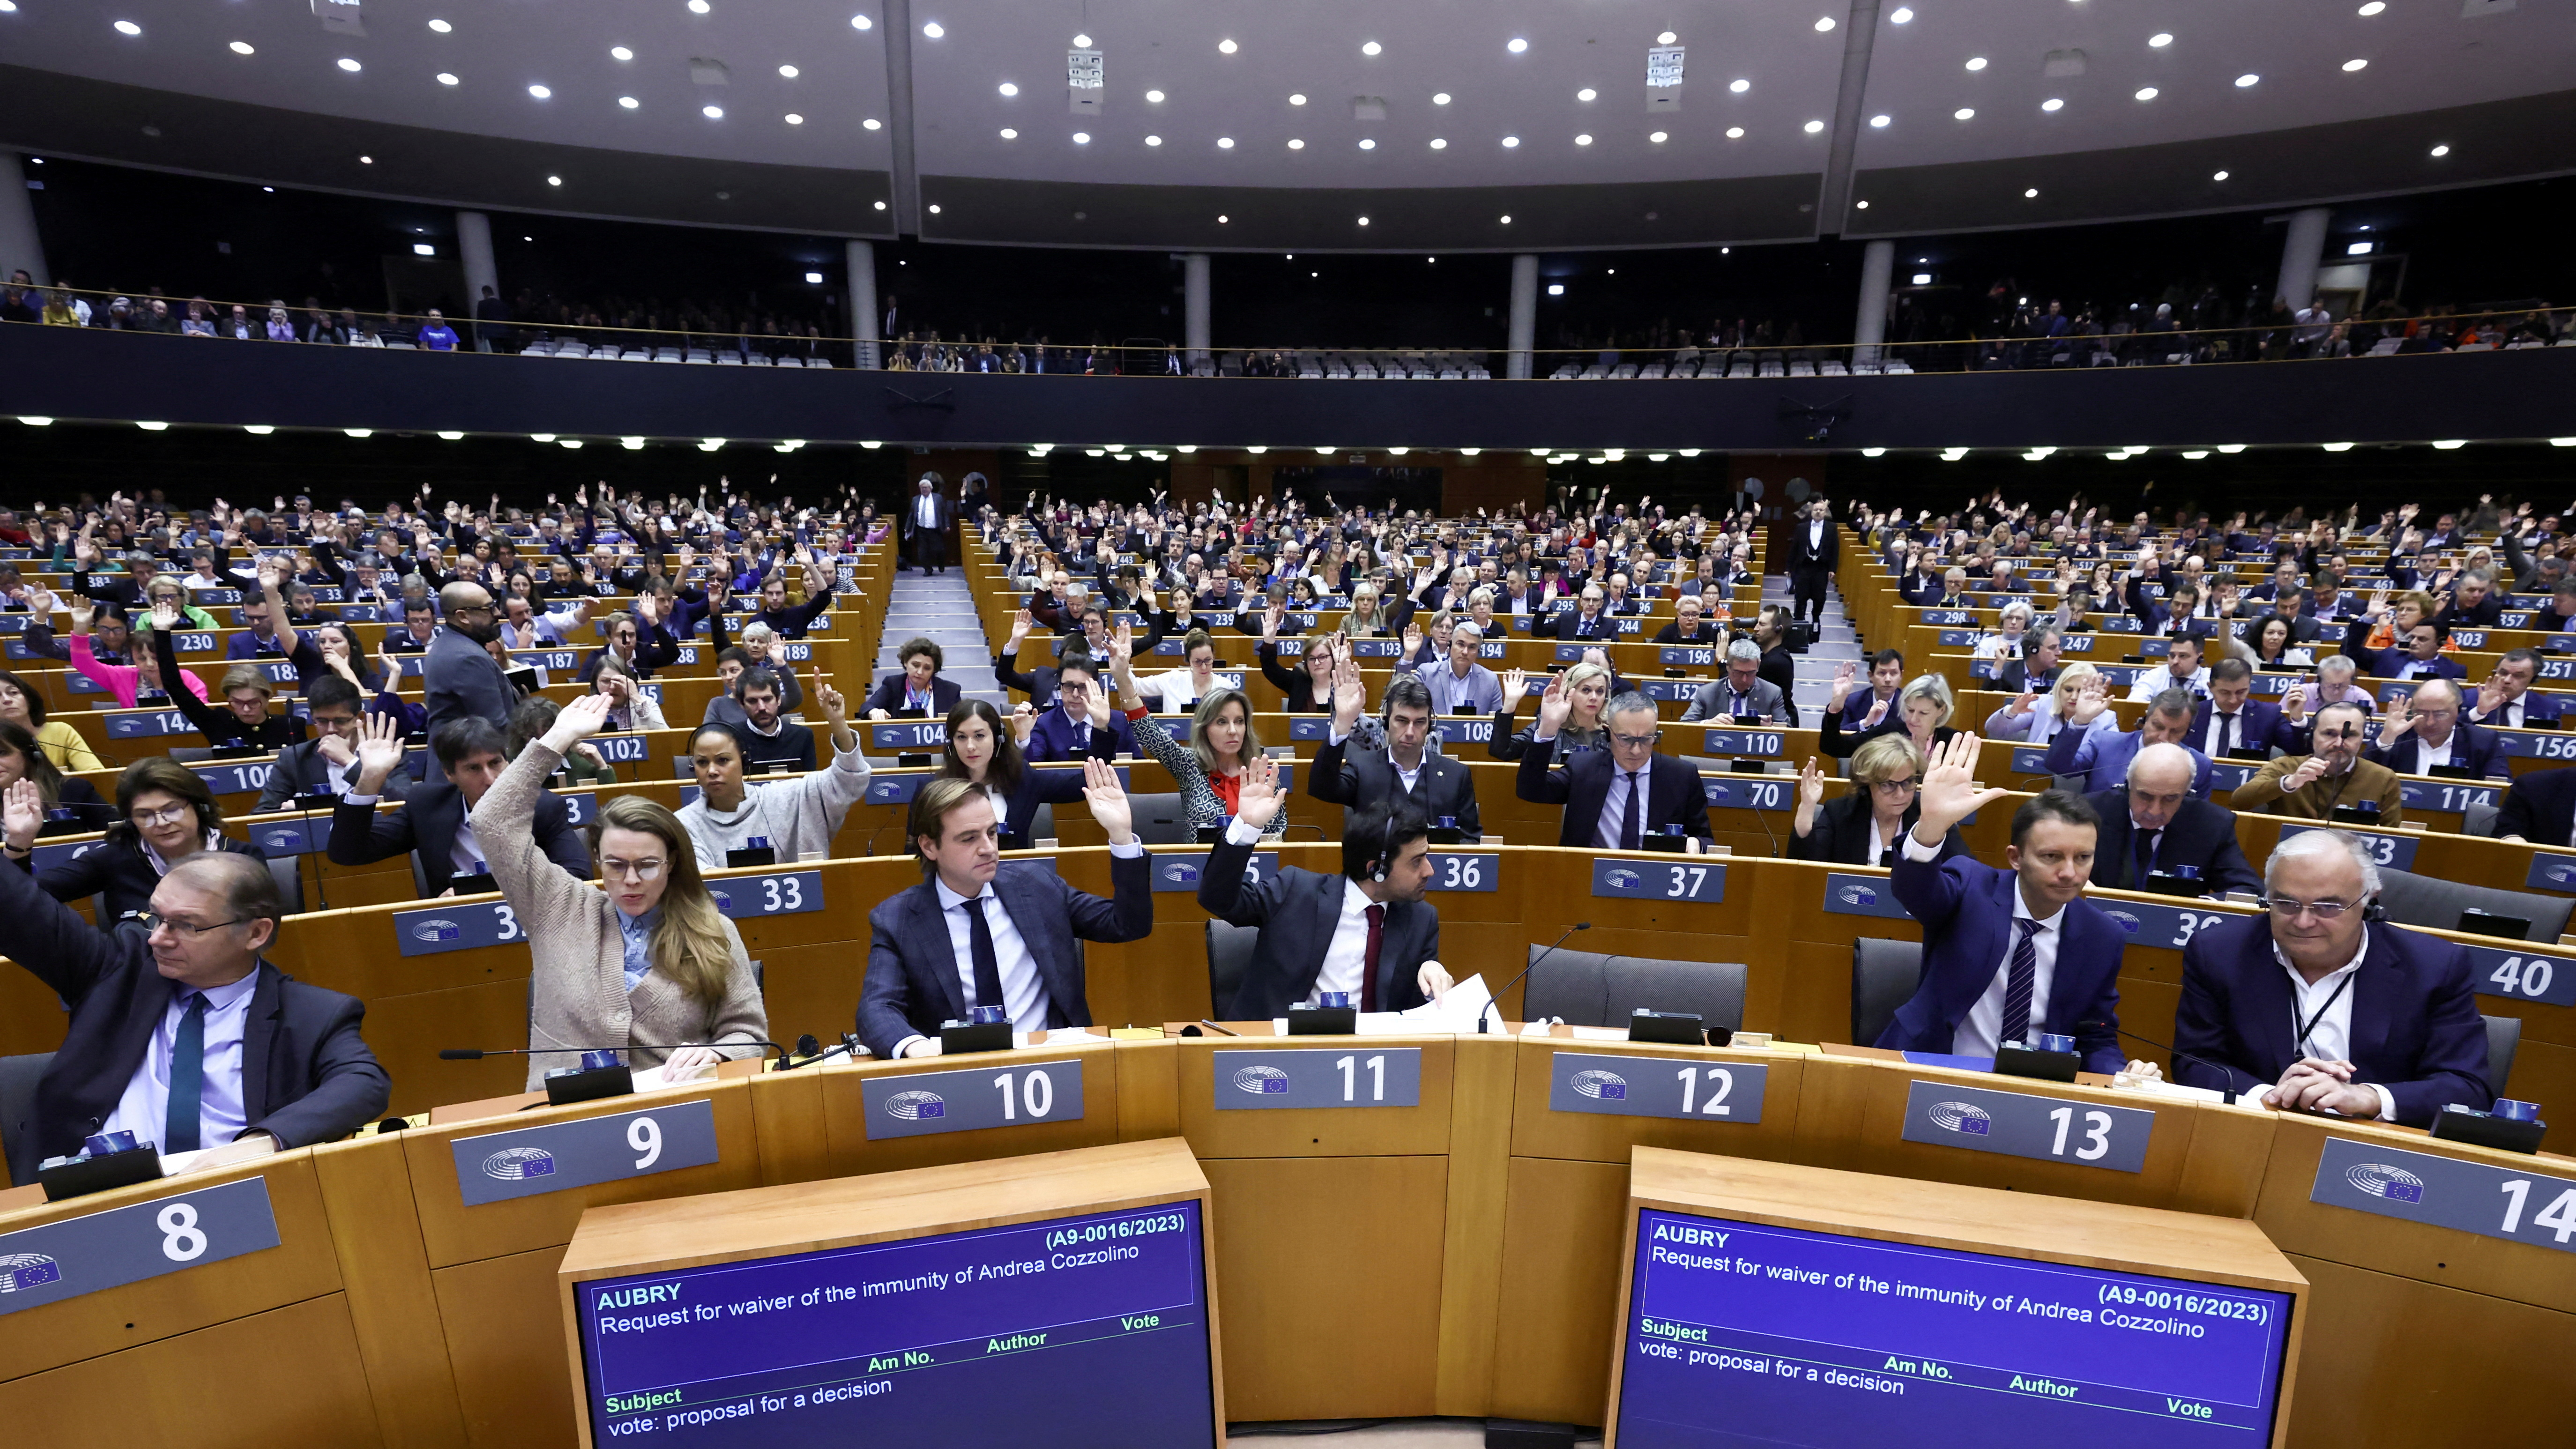 EU parliament vote on lifting immunity of two MEPs in Brussels